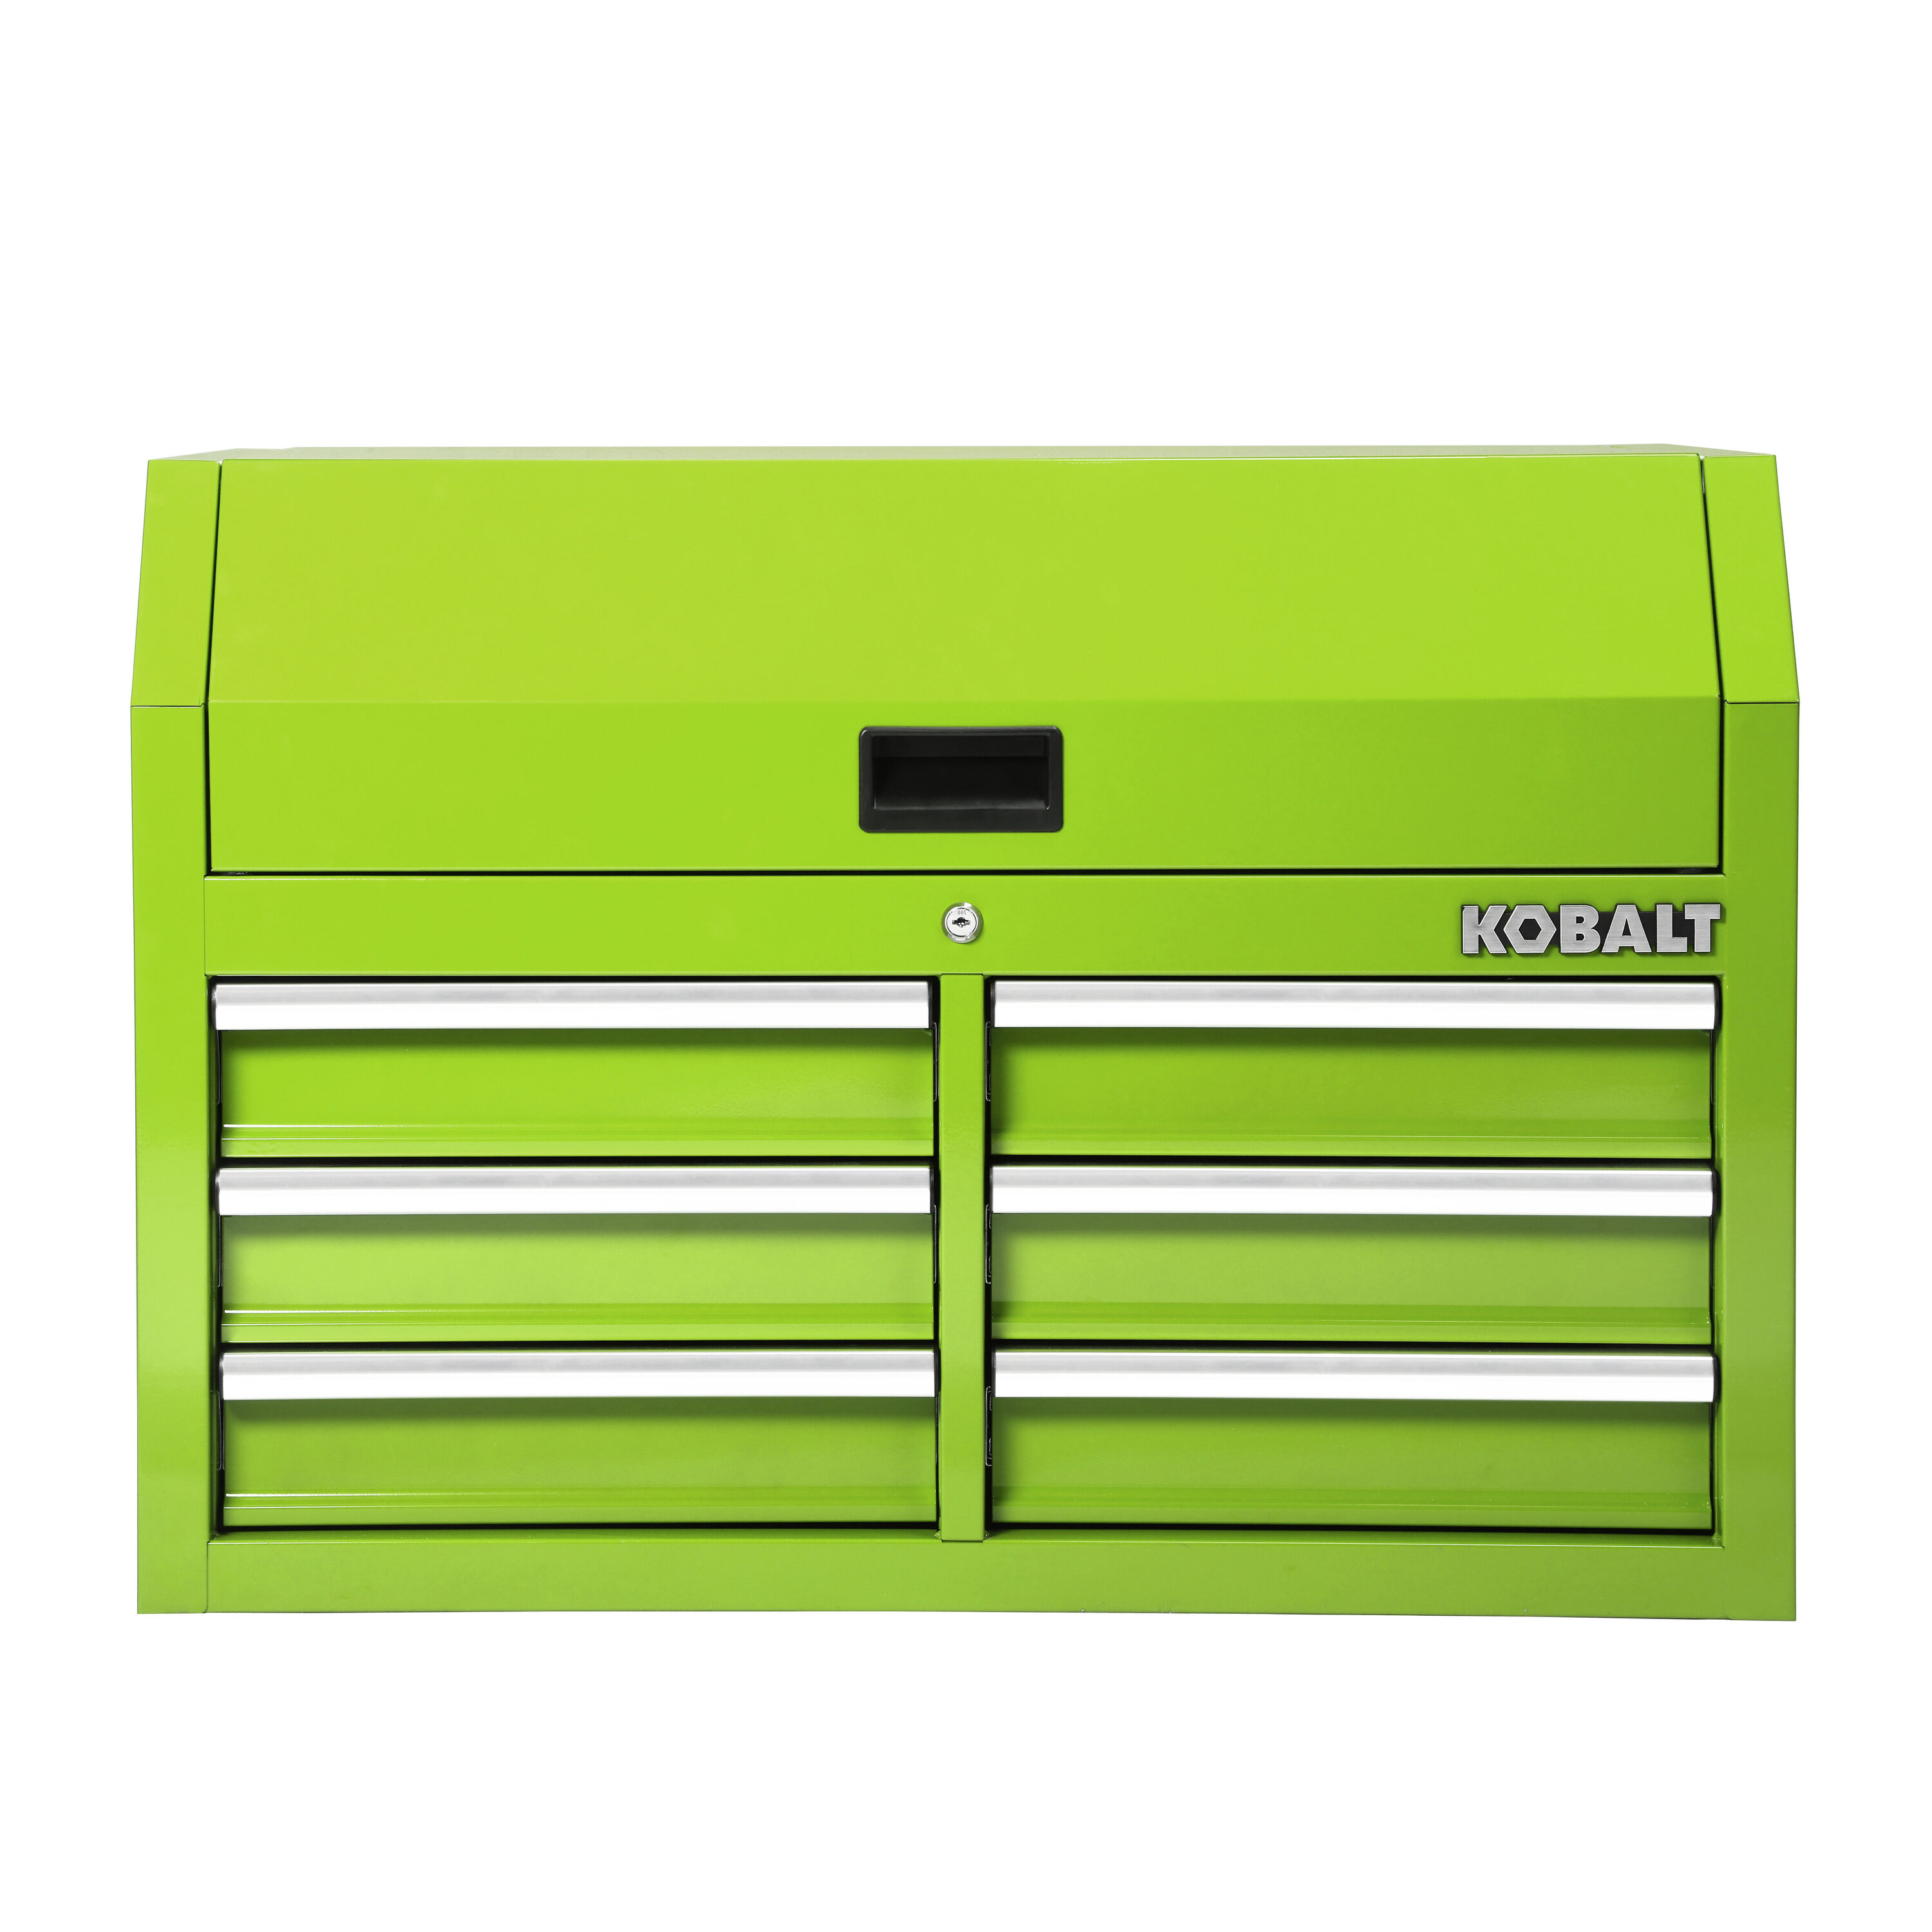 GREEN Kobalt Mini Toolbox - SOLD OUT COLOR! New In Box!